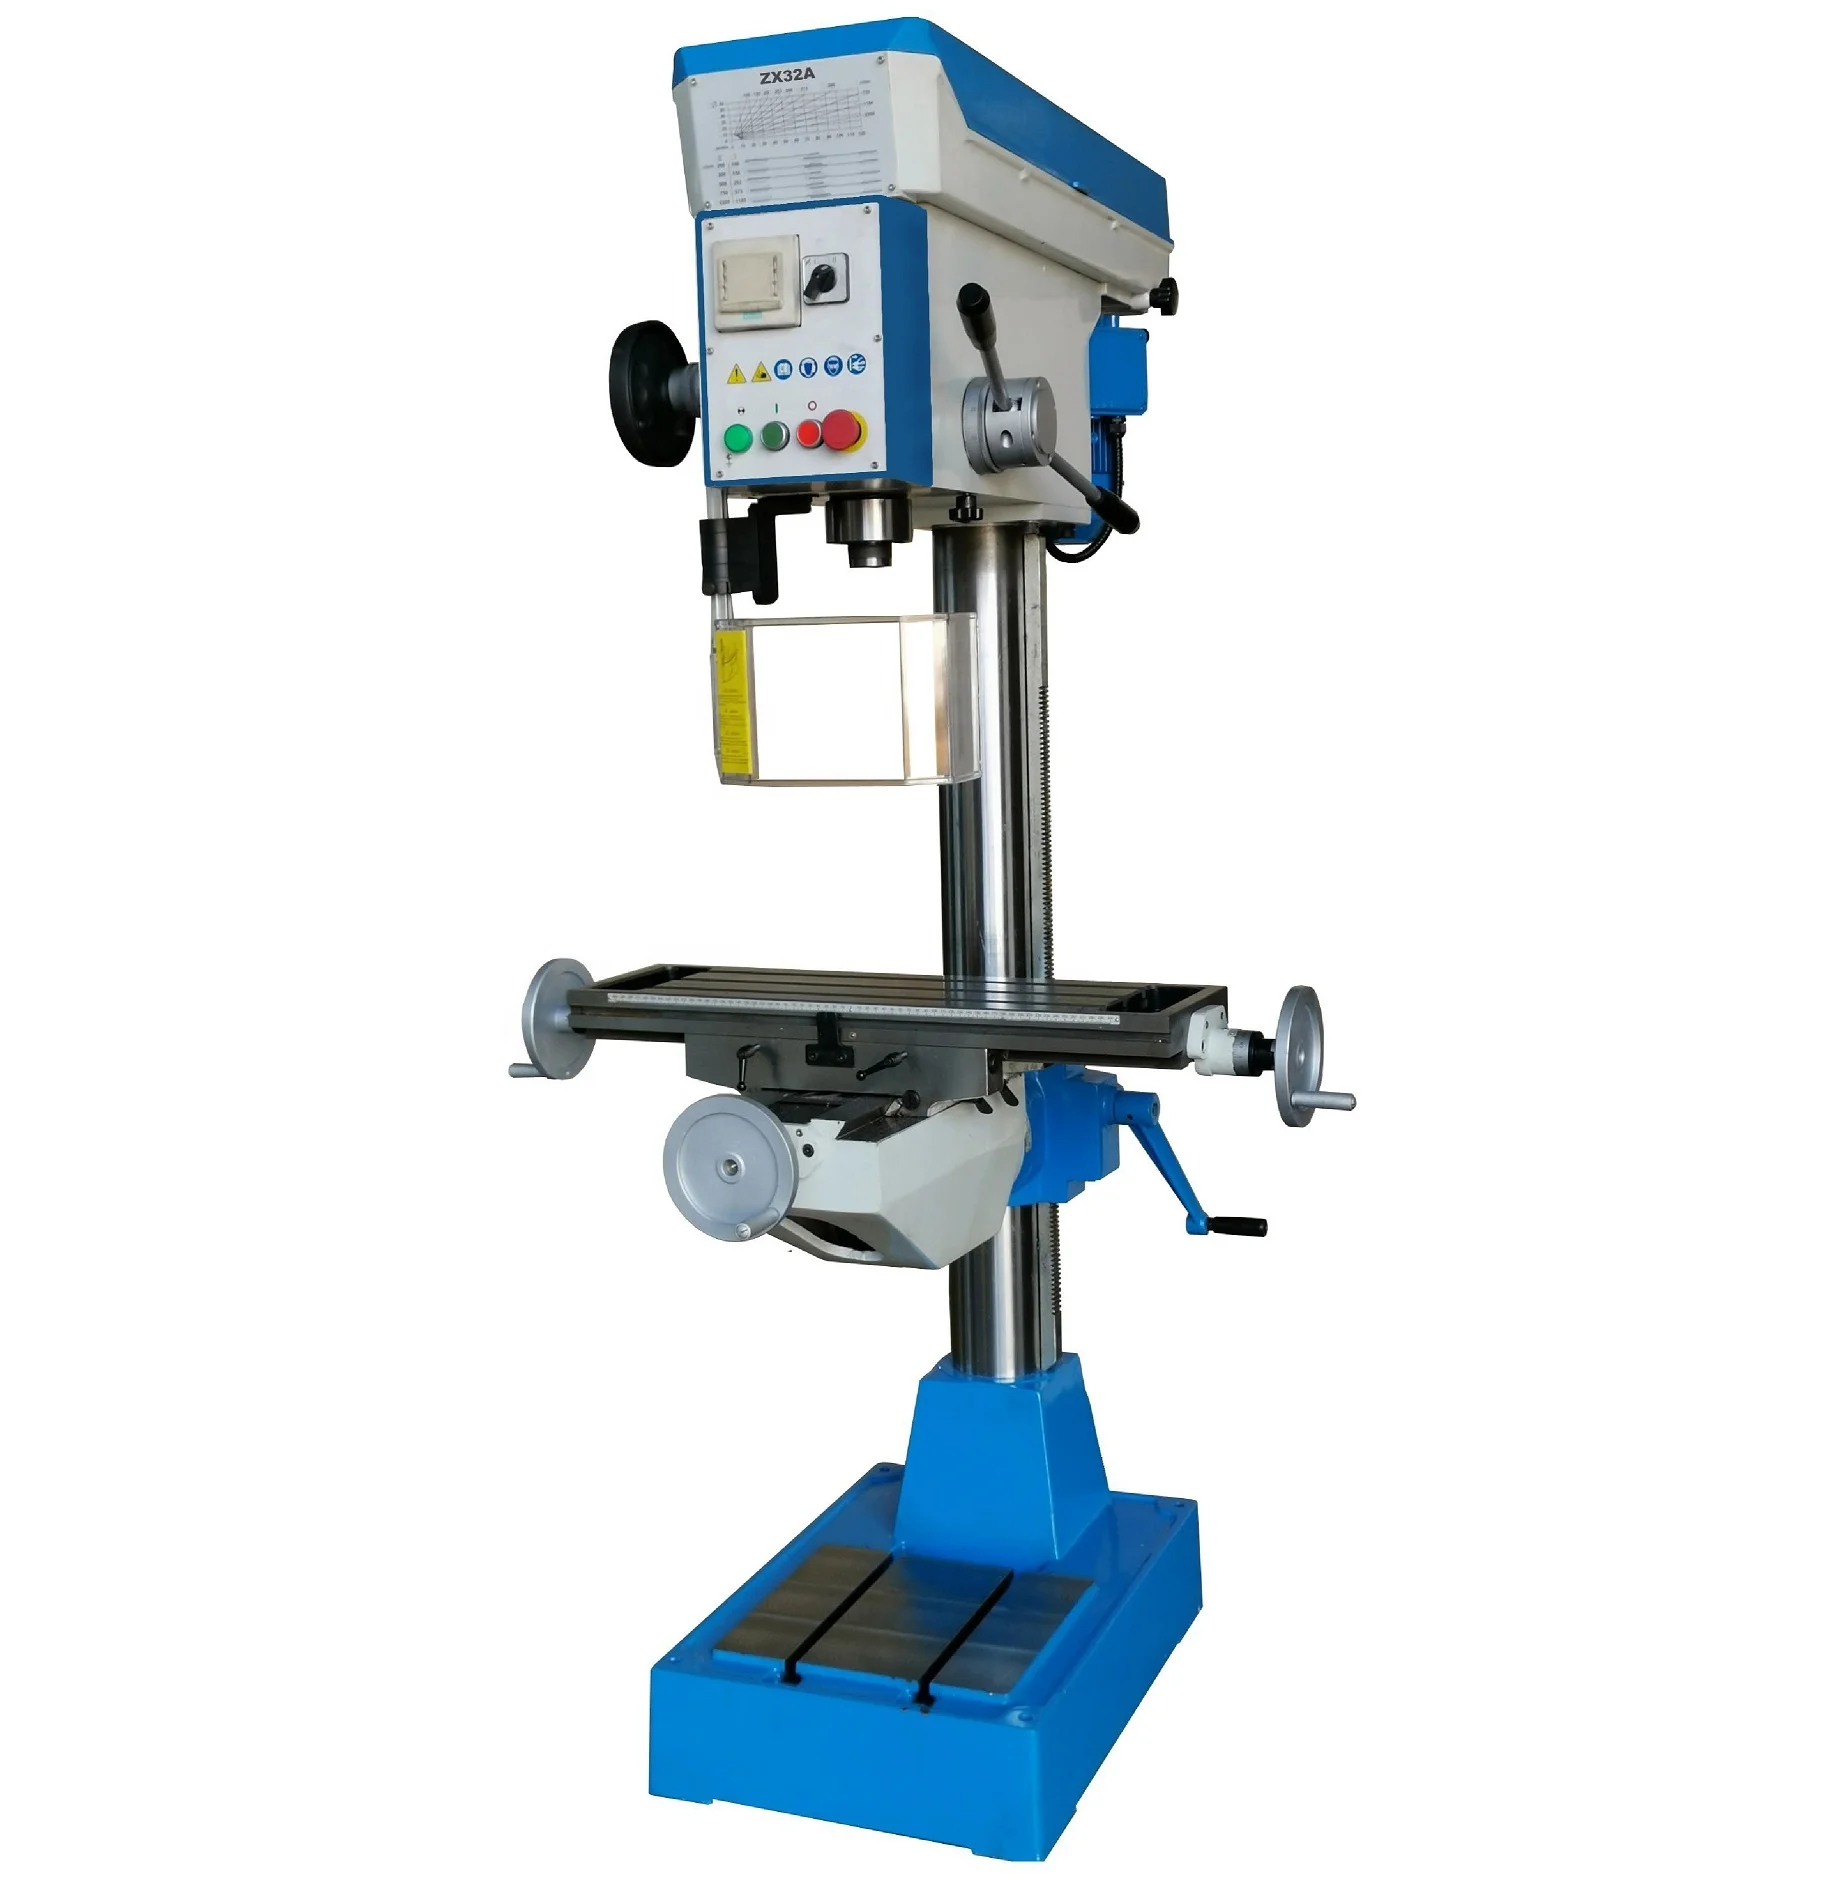 drilling and milling machine ZX32A| Alibaba.com